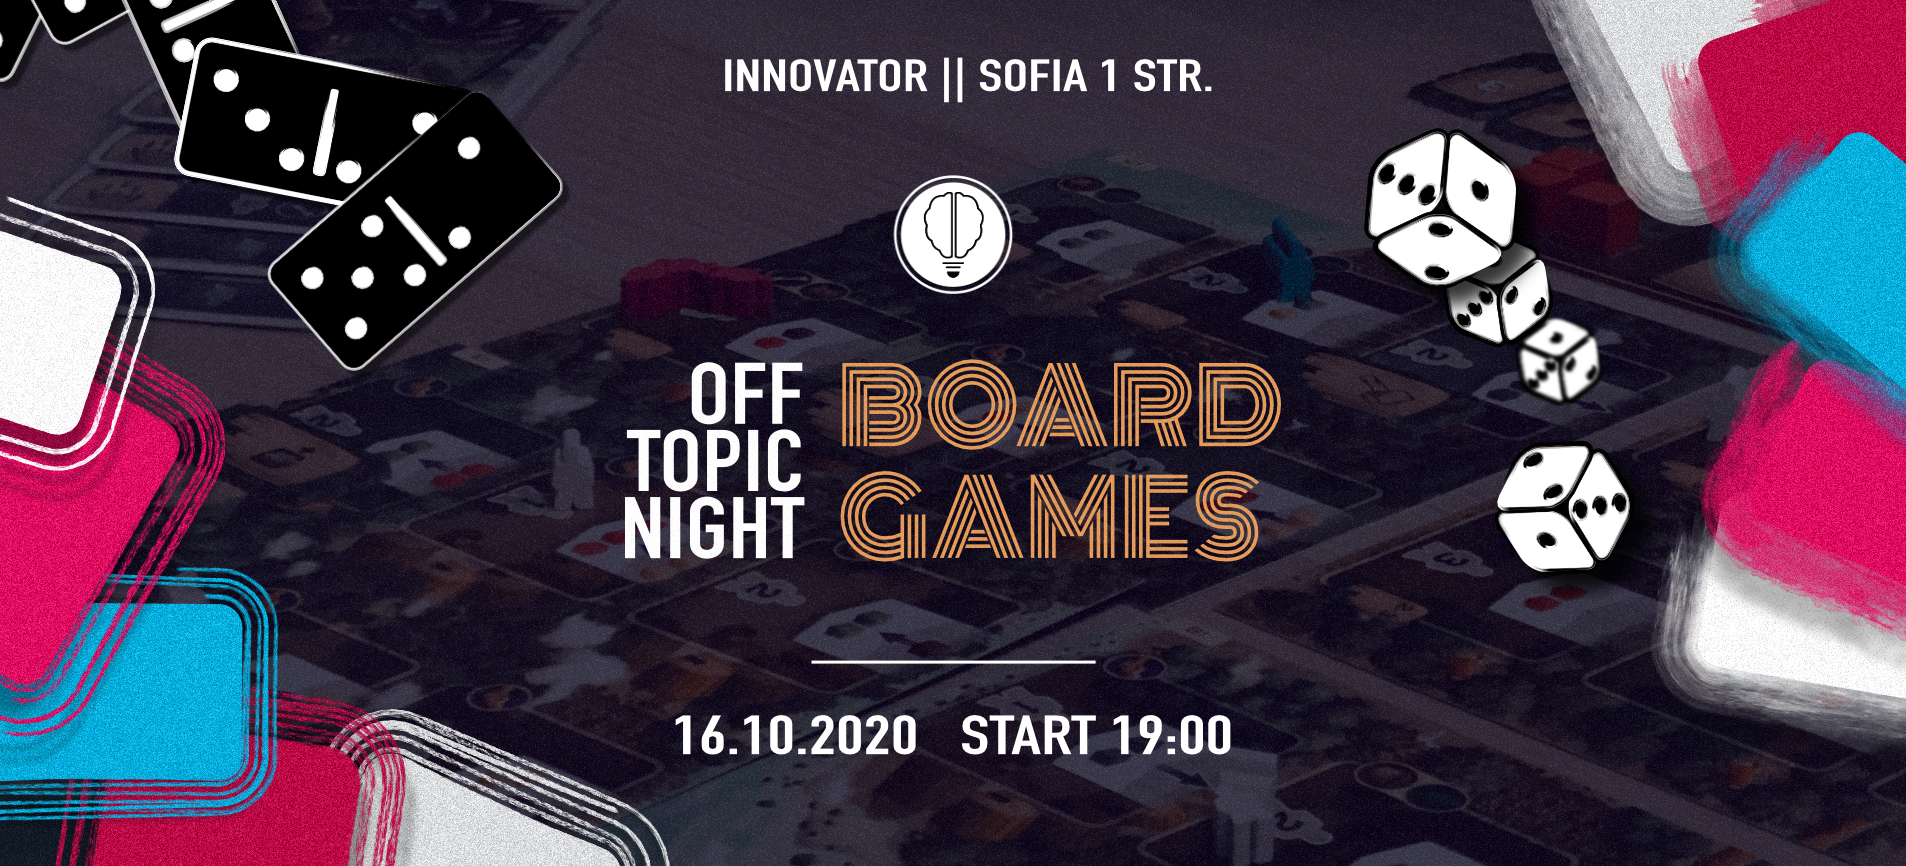 OFF Topic | Board Games Night 5 | Innovator Coworking Space